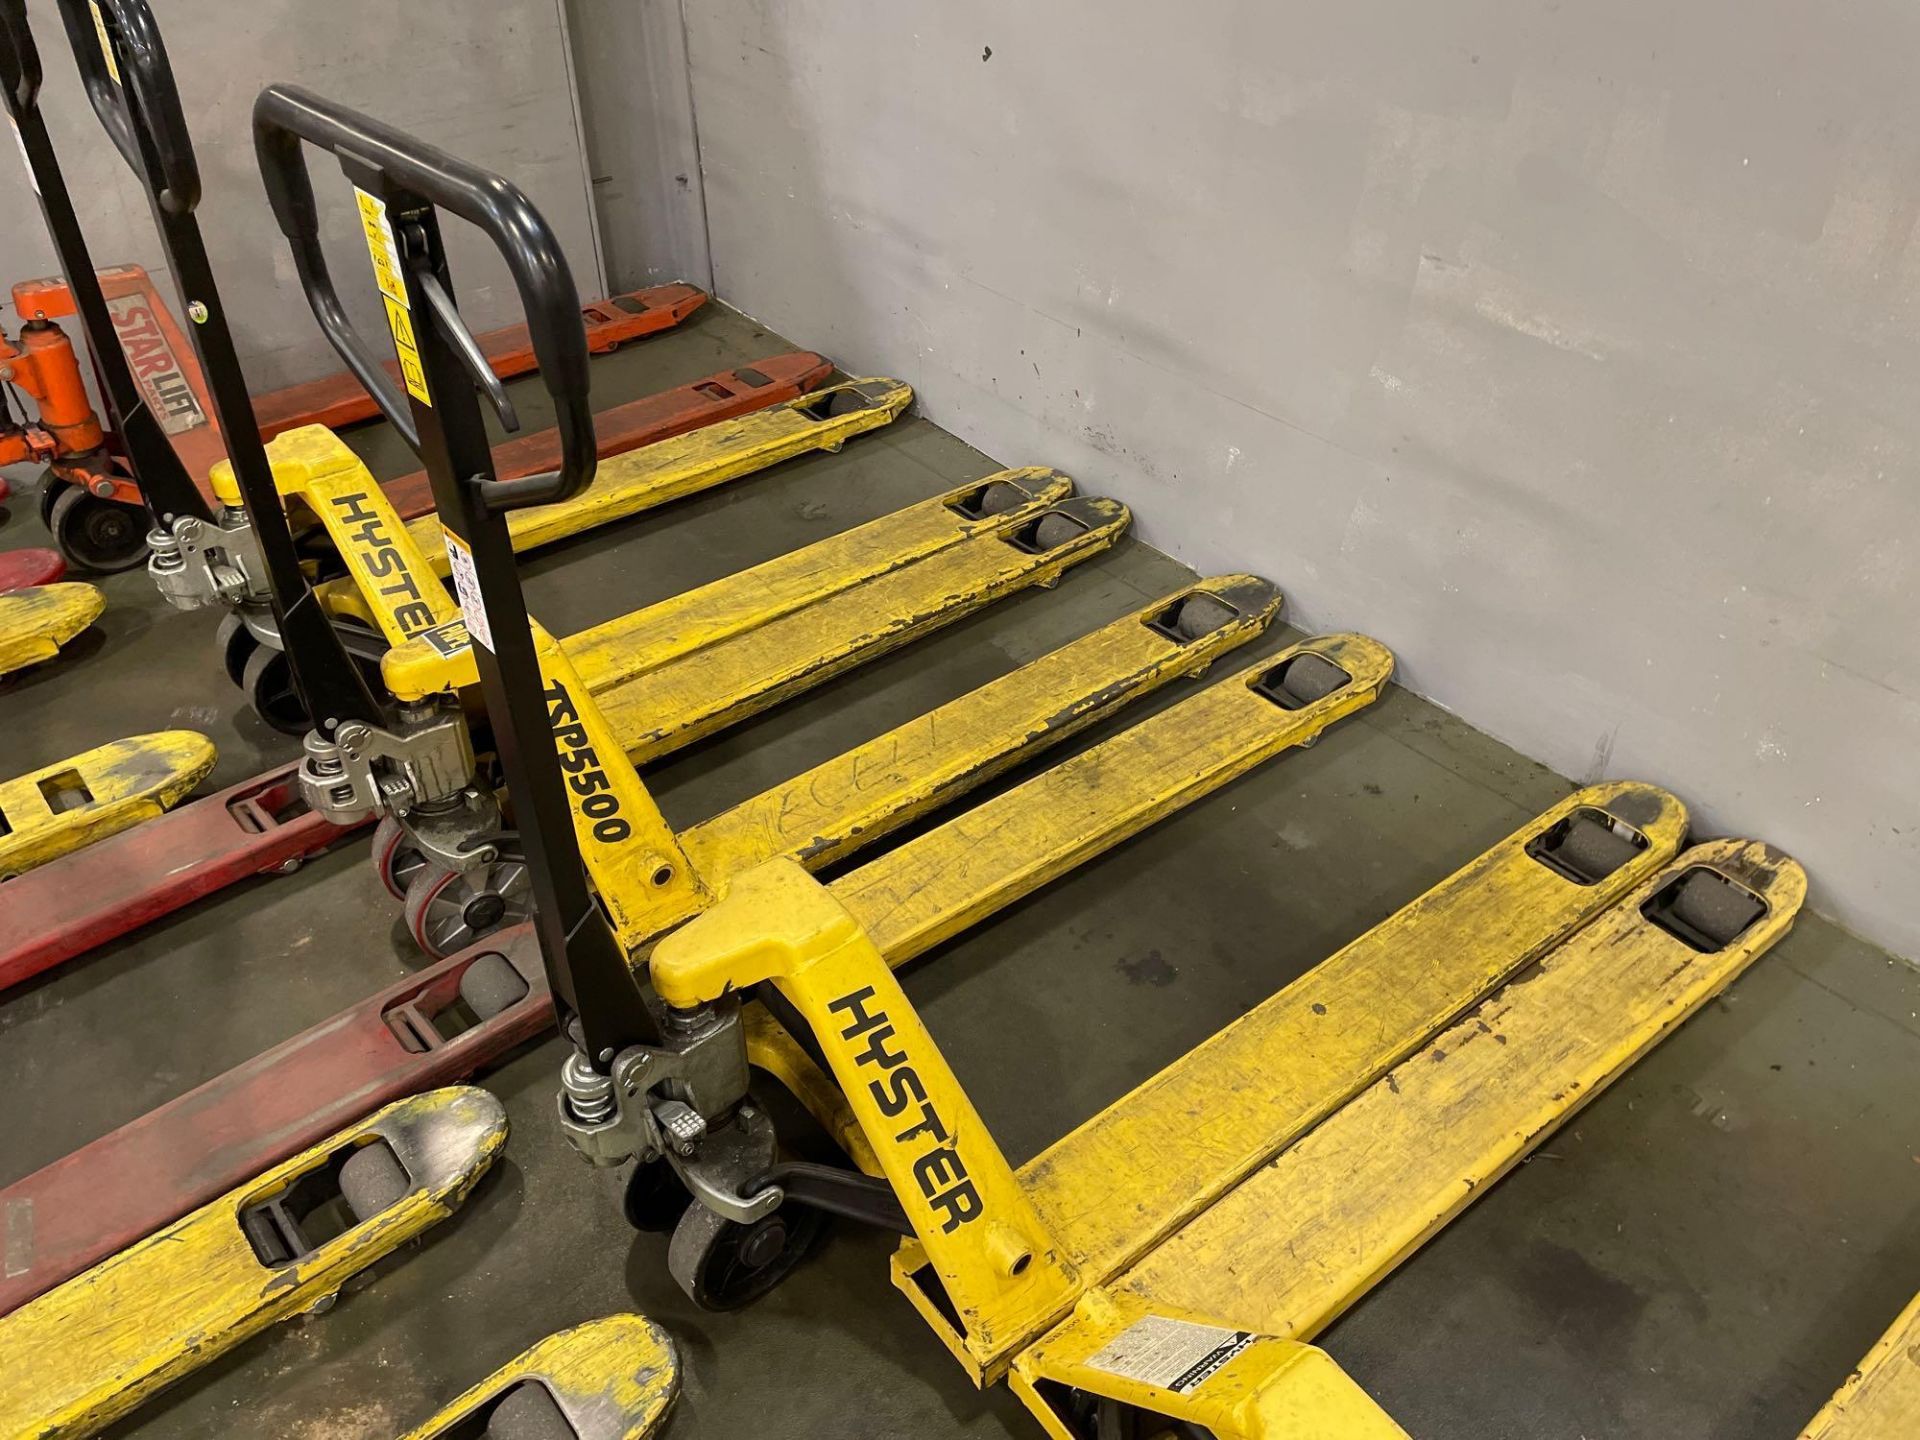 Lot of 2 Pallet Jacks: (1) Pape, max. 5,500 lbs., (1) Hyster, max. 5,500 lbs. - Image 3 of 5